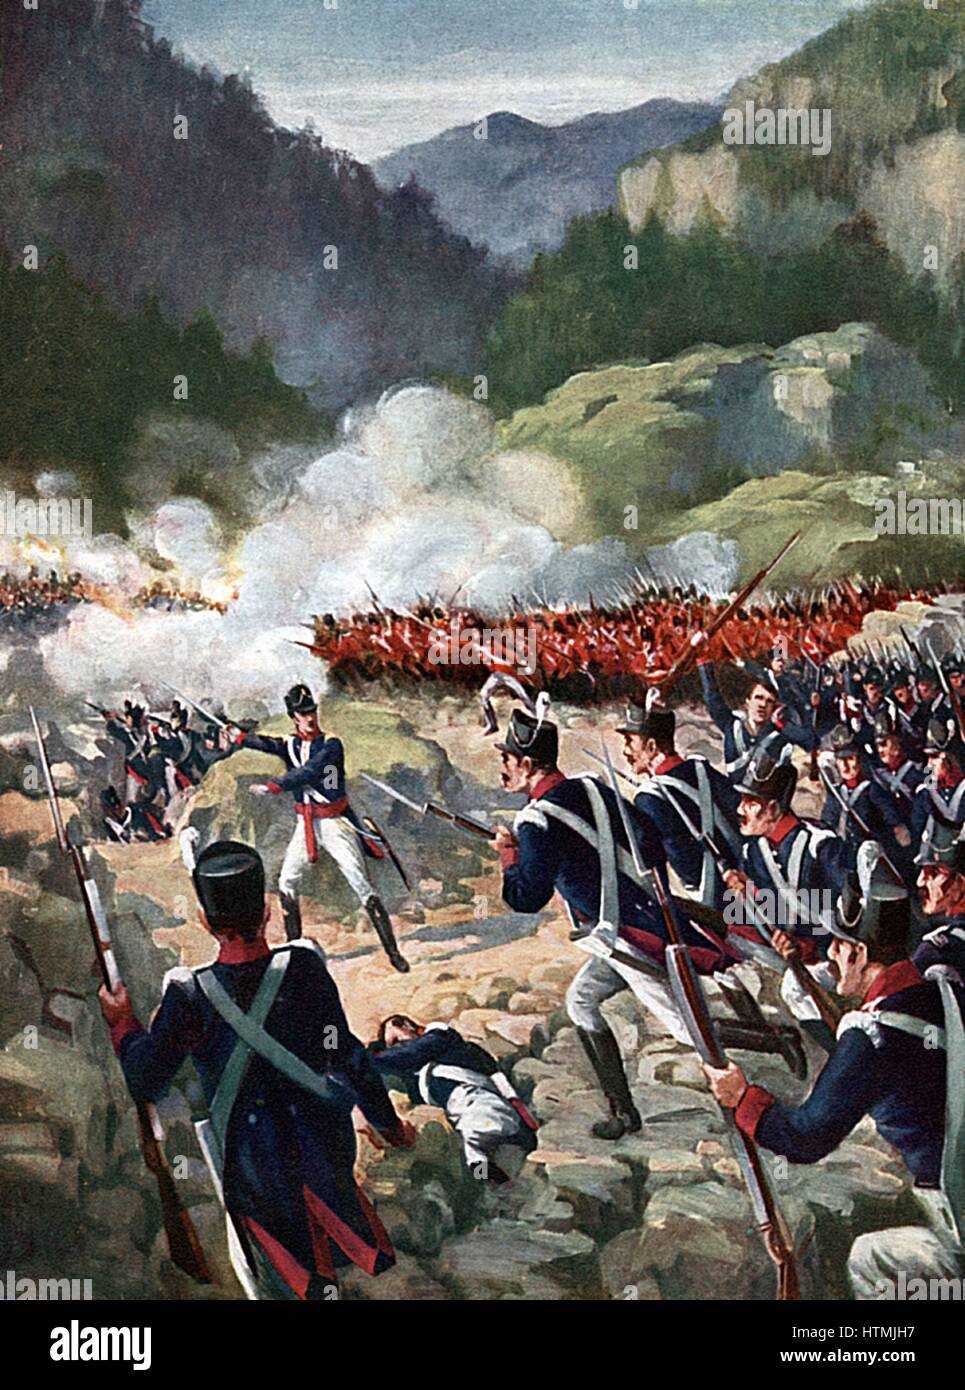 Battle of Busaco, 27 September 1810:British and allied troops under Wellington repulsed French under Massena. Illustration Stock Photo